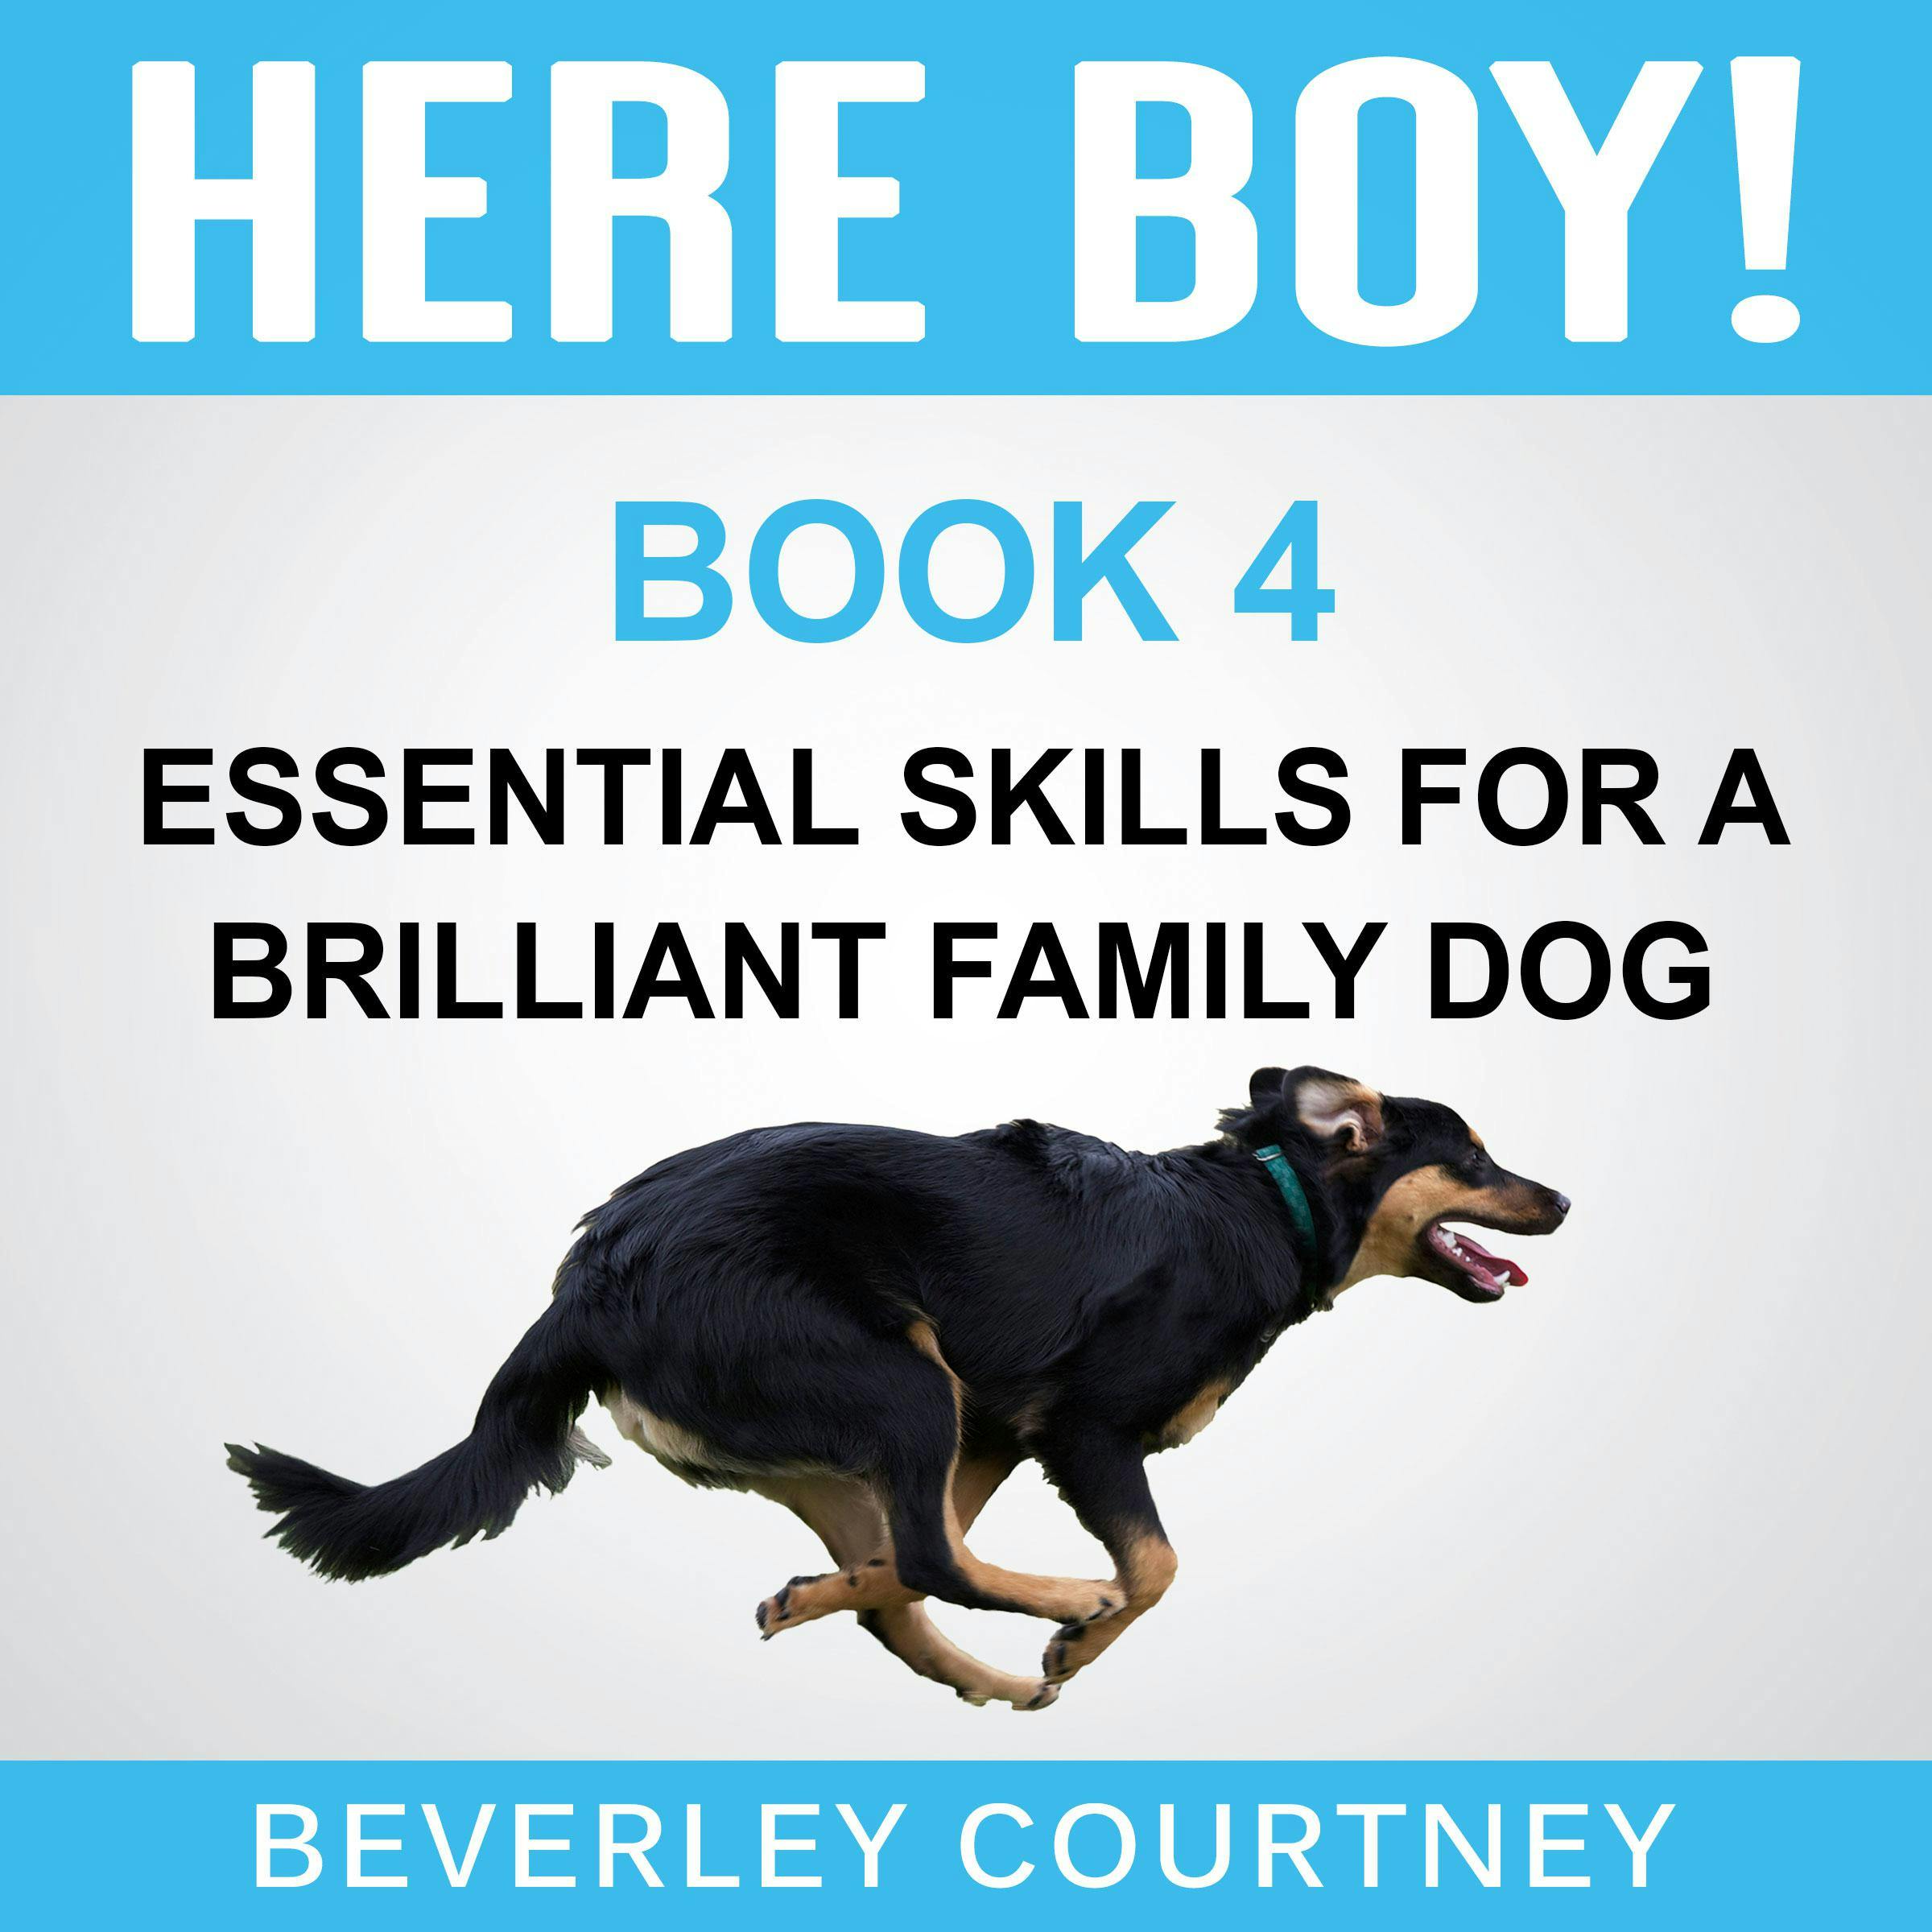 Here Boy! Essential Skills for a Brilliant Family Dog, Book 4: Step-By-Step to a Stunning Recall from Your Brilliant Family Dog - Beverley Courtney